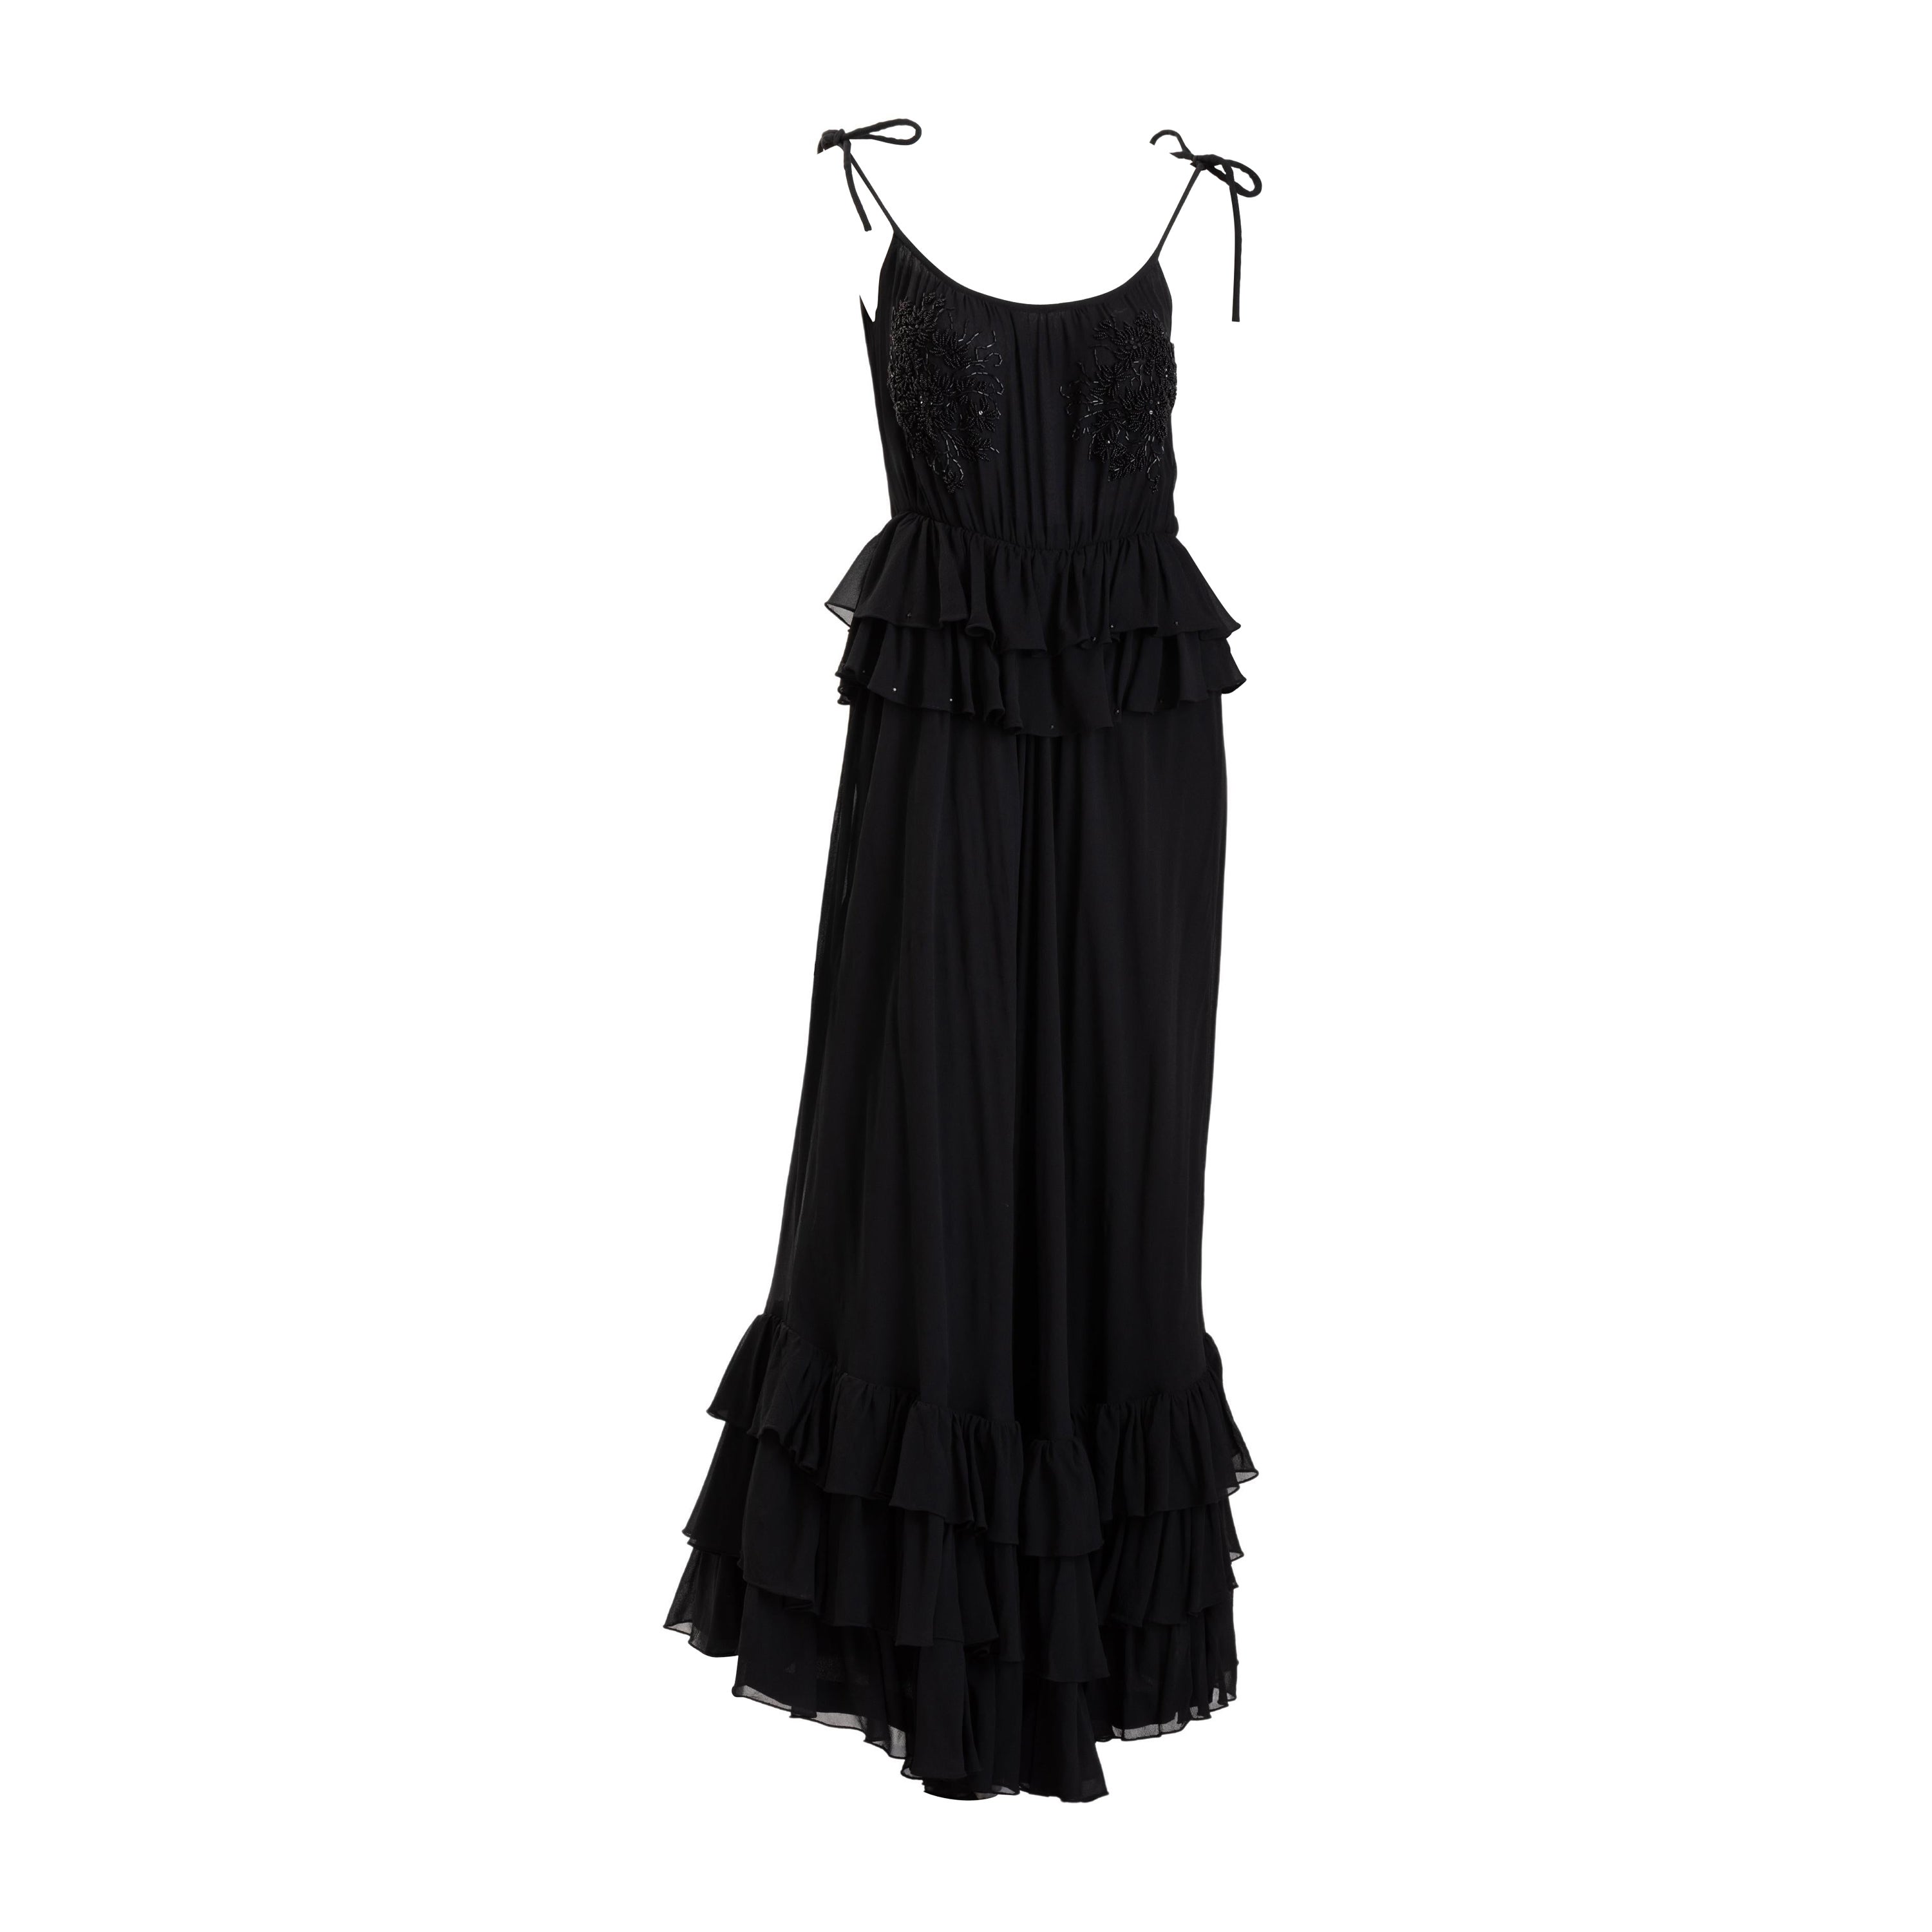 Valentino Boutique Black Beaded Silk Chiffon Evening Gown  Size US 6